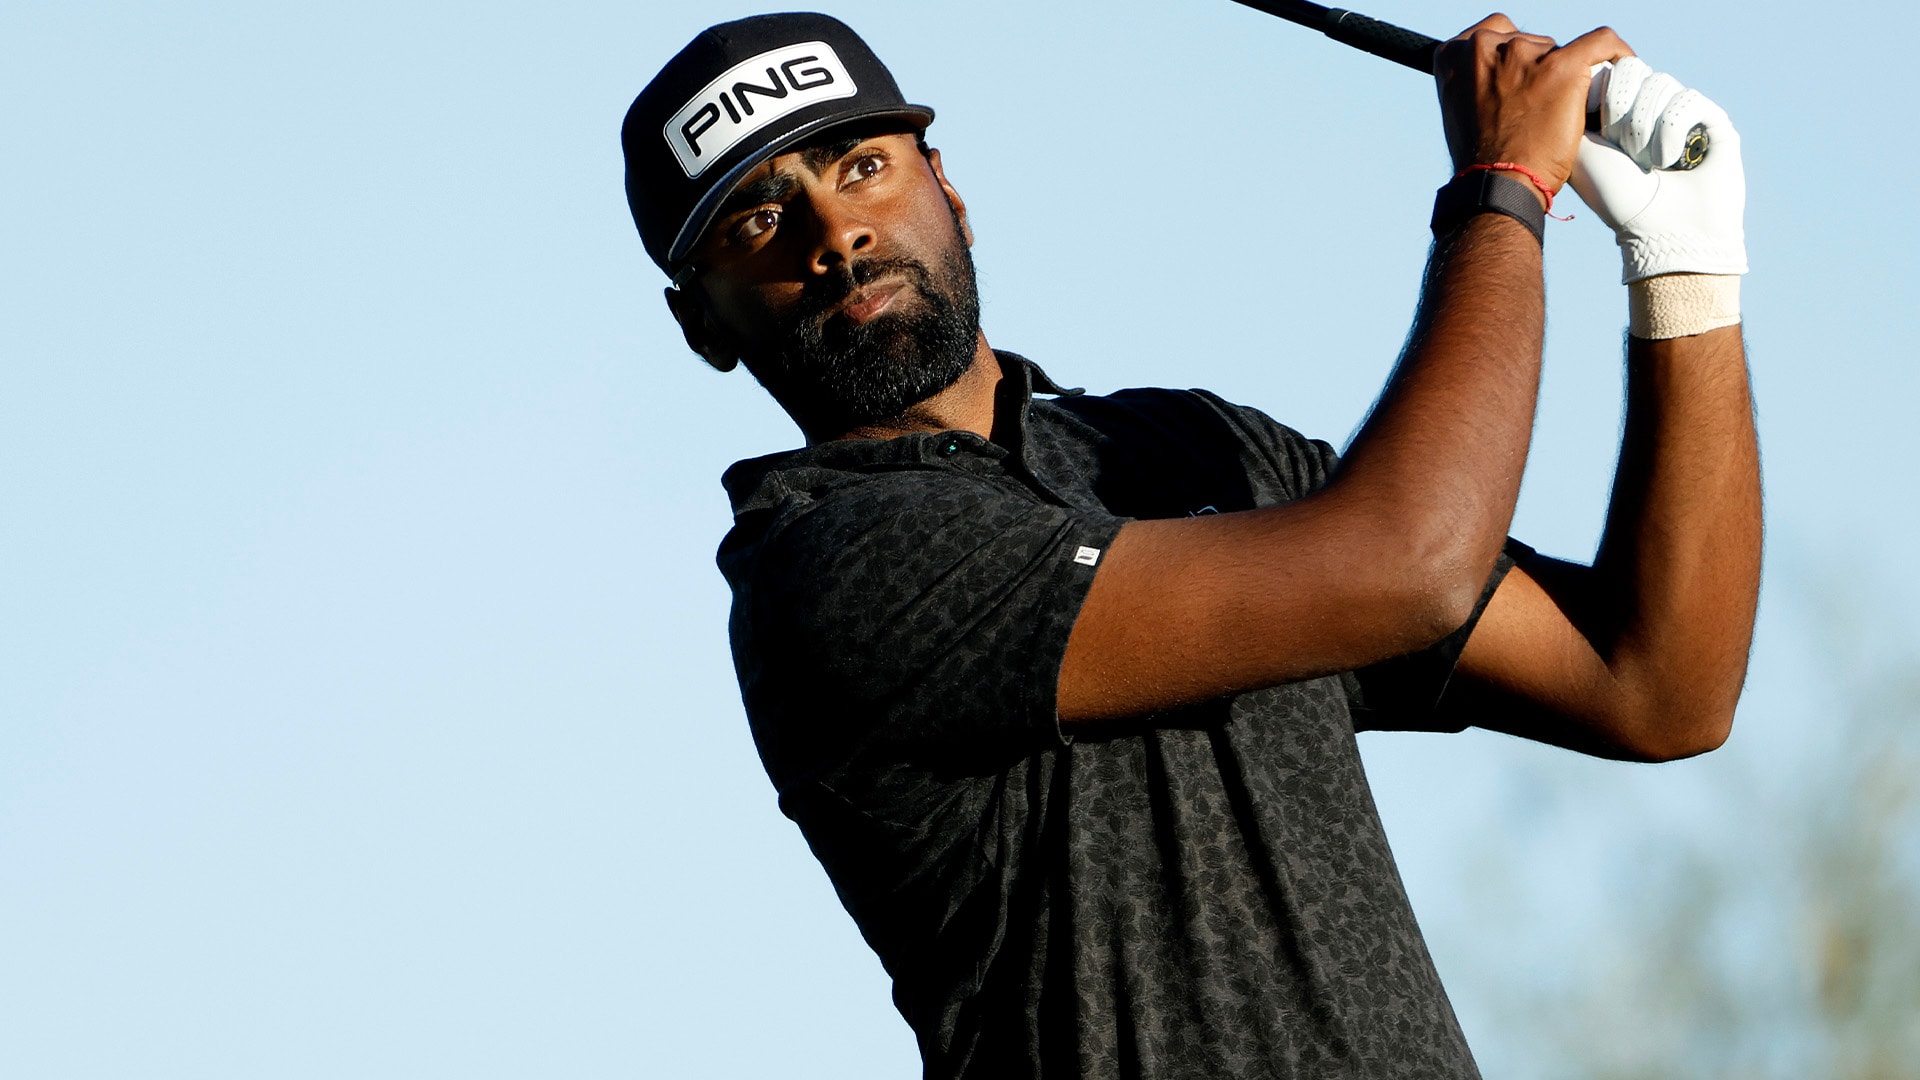 Rookie Sahith Theegala, playing on sponsor’s exemption, leads WM Phoenix Open